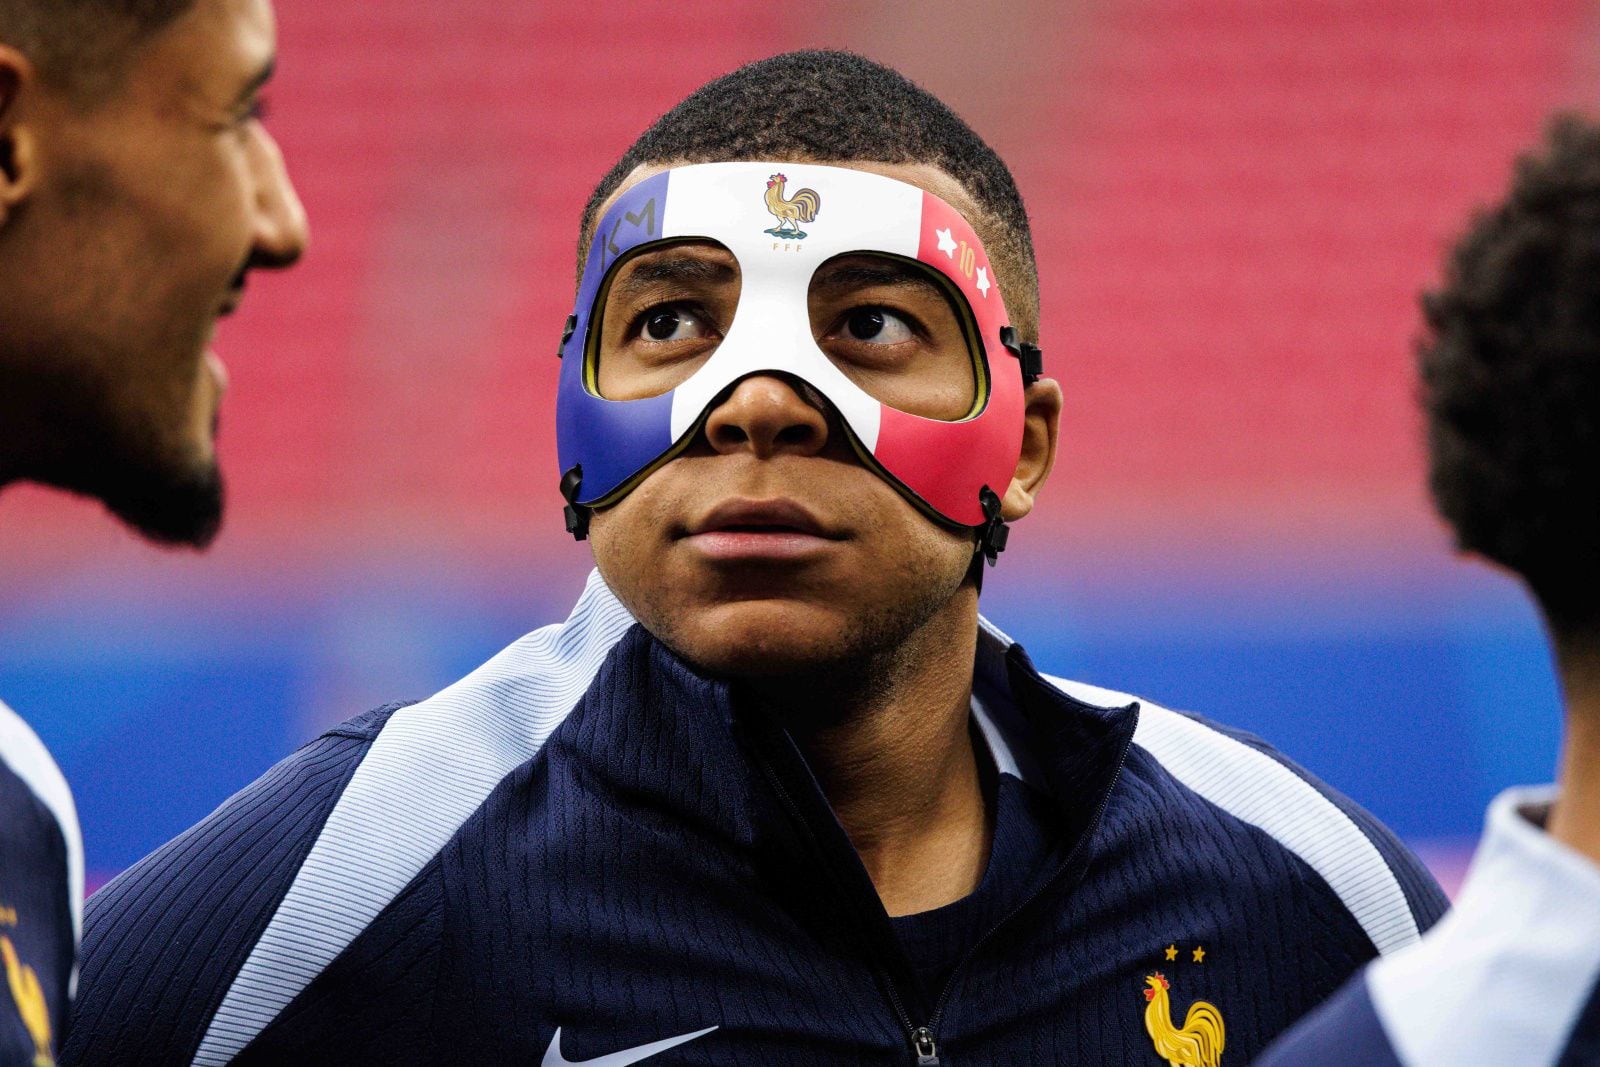 Why can’t Kylian Mbappé wear a French flag mask against the Netherlands at Euro 2024?